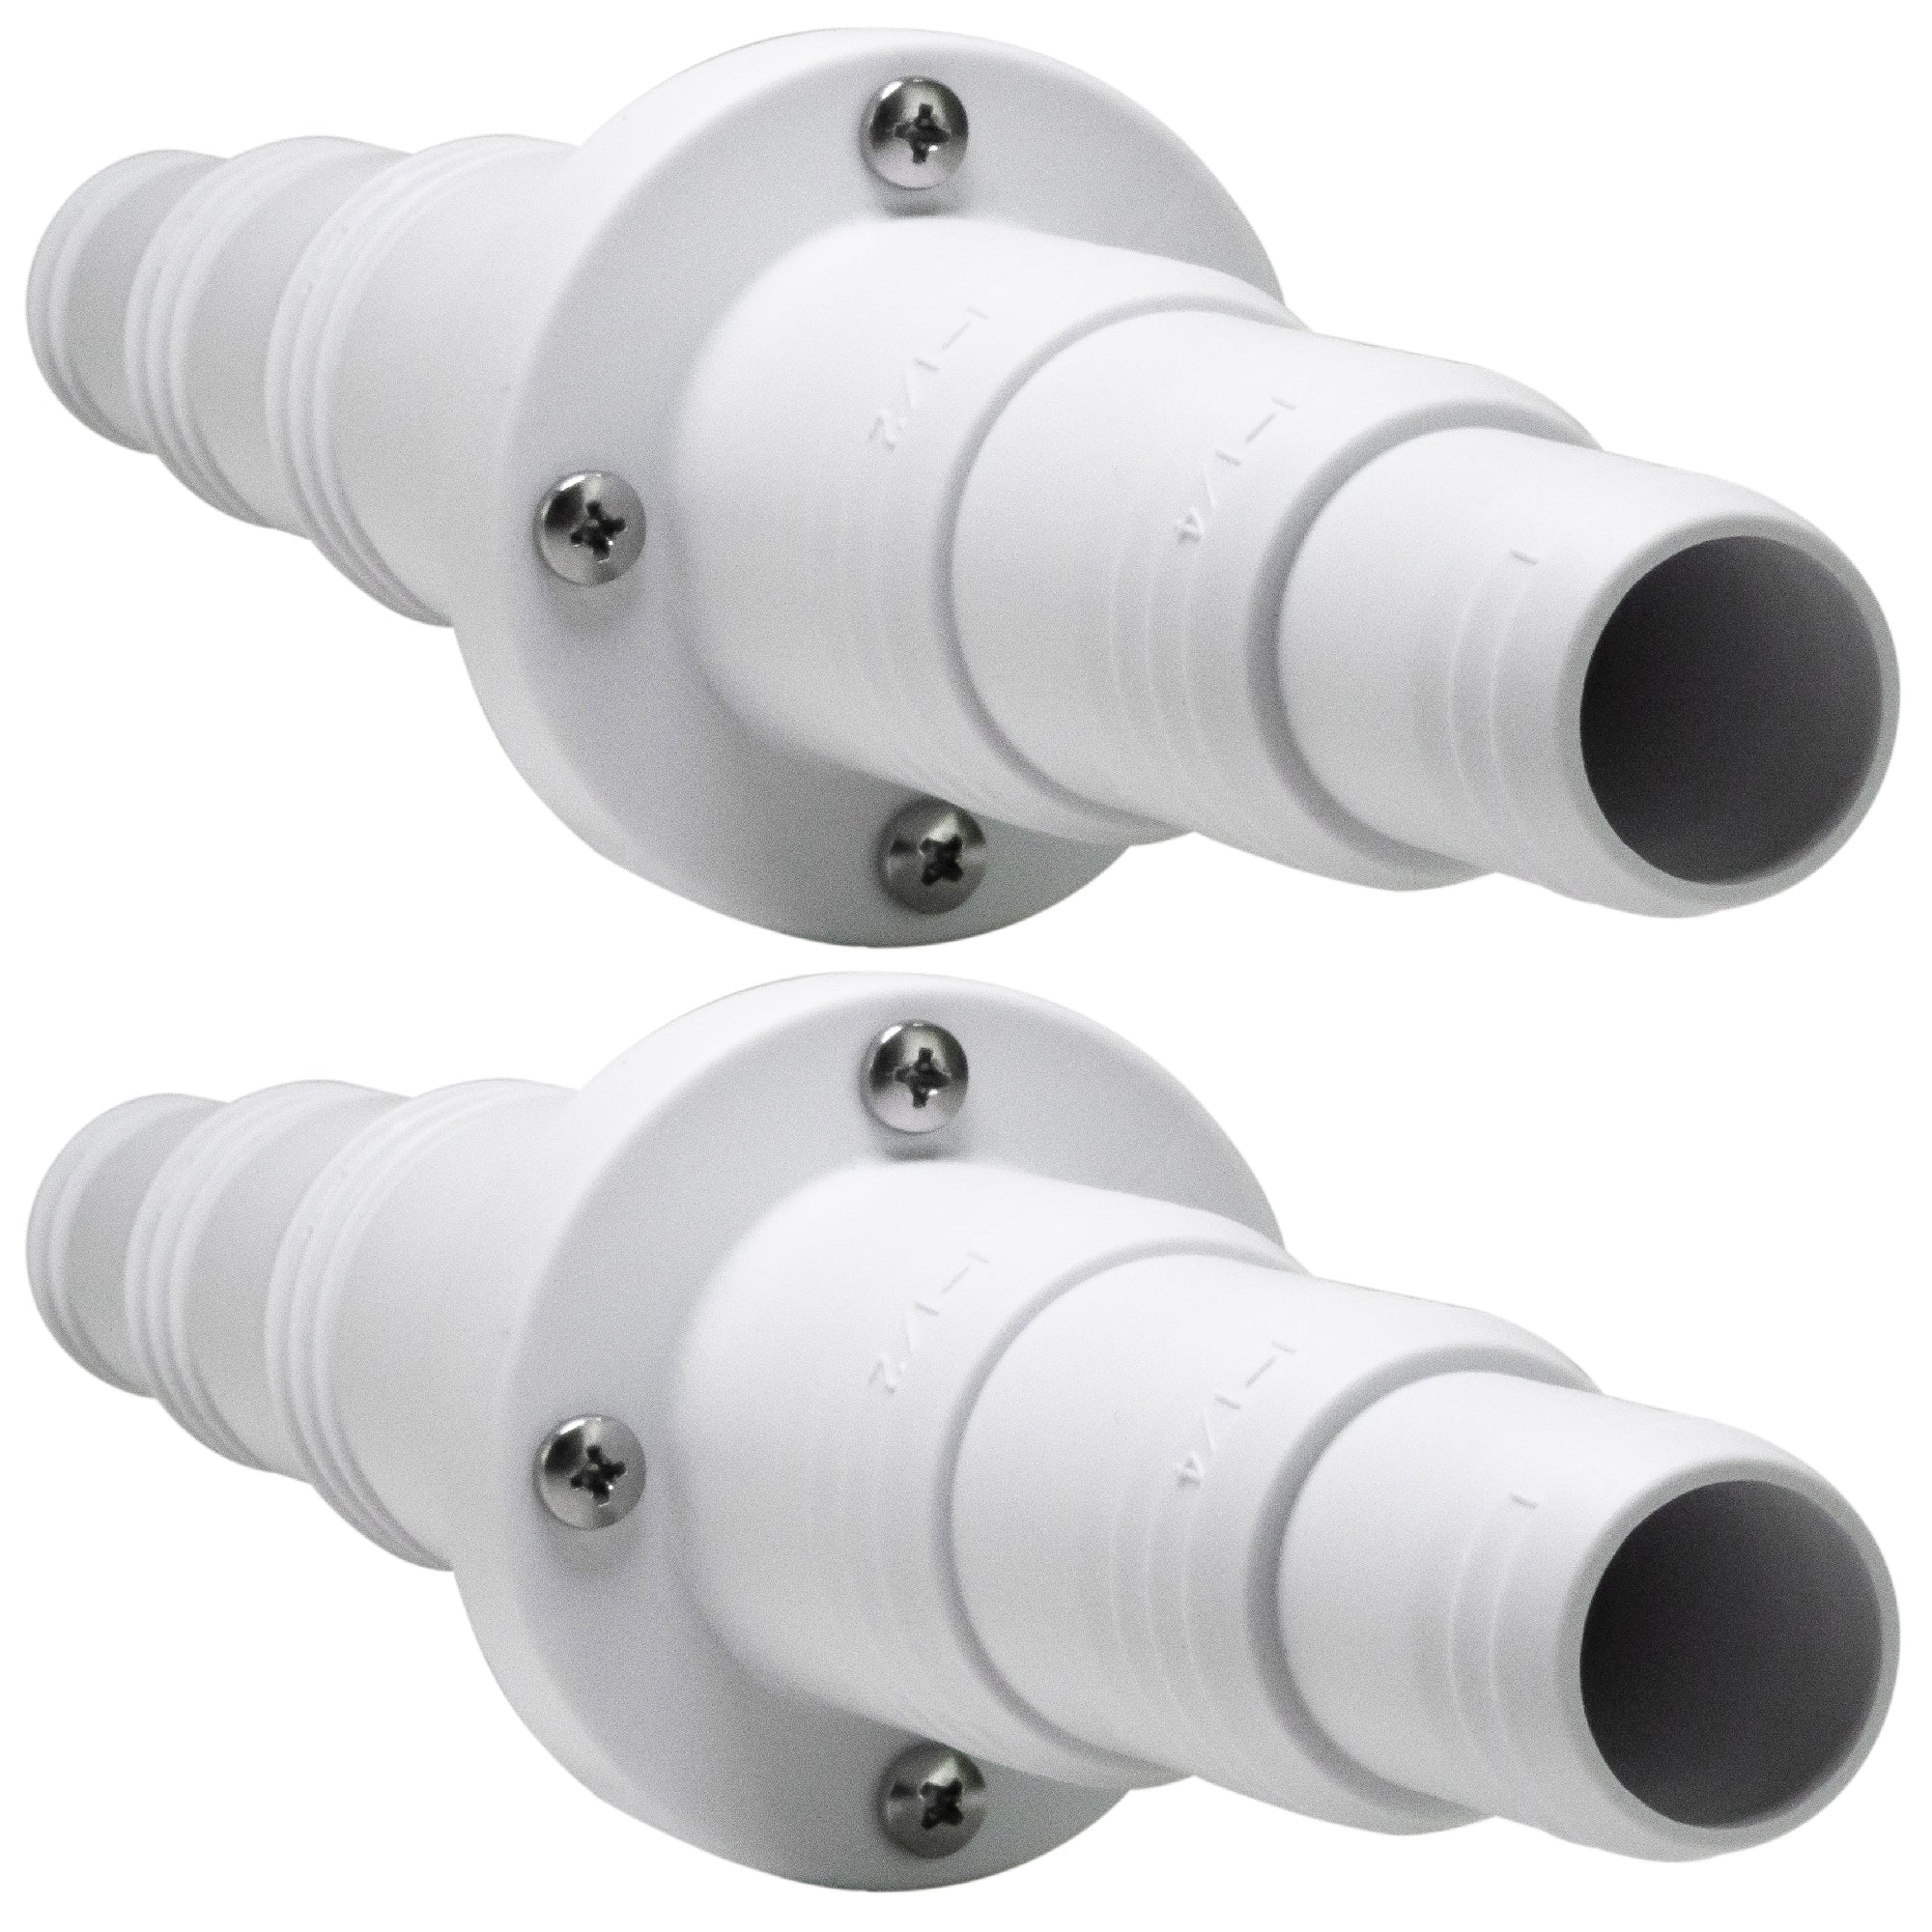 1" - 1-1/4" - 1-1/2" Check Valve, In-Line One-Way Stepped Connection - 2-Pack - FO2056-M2